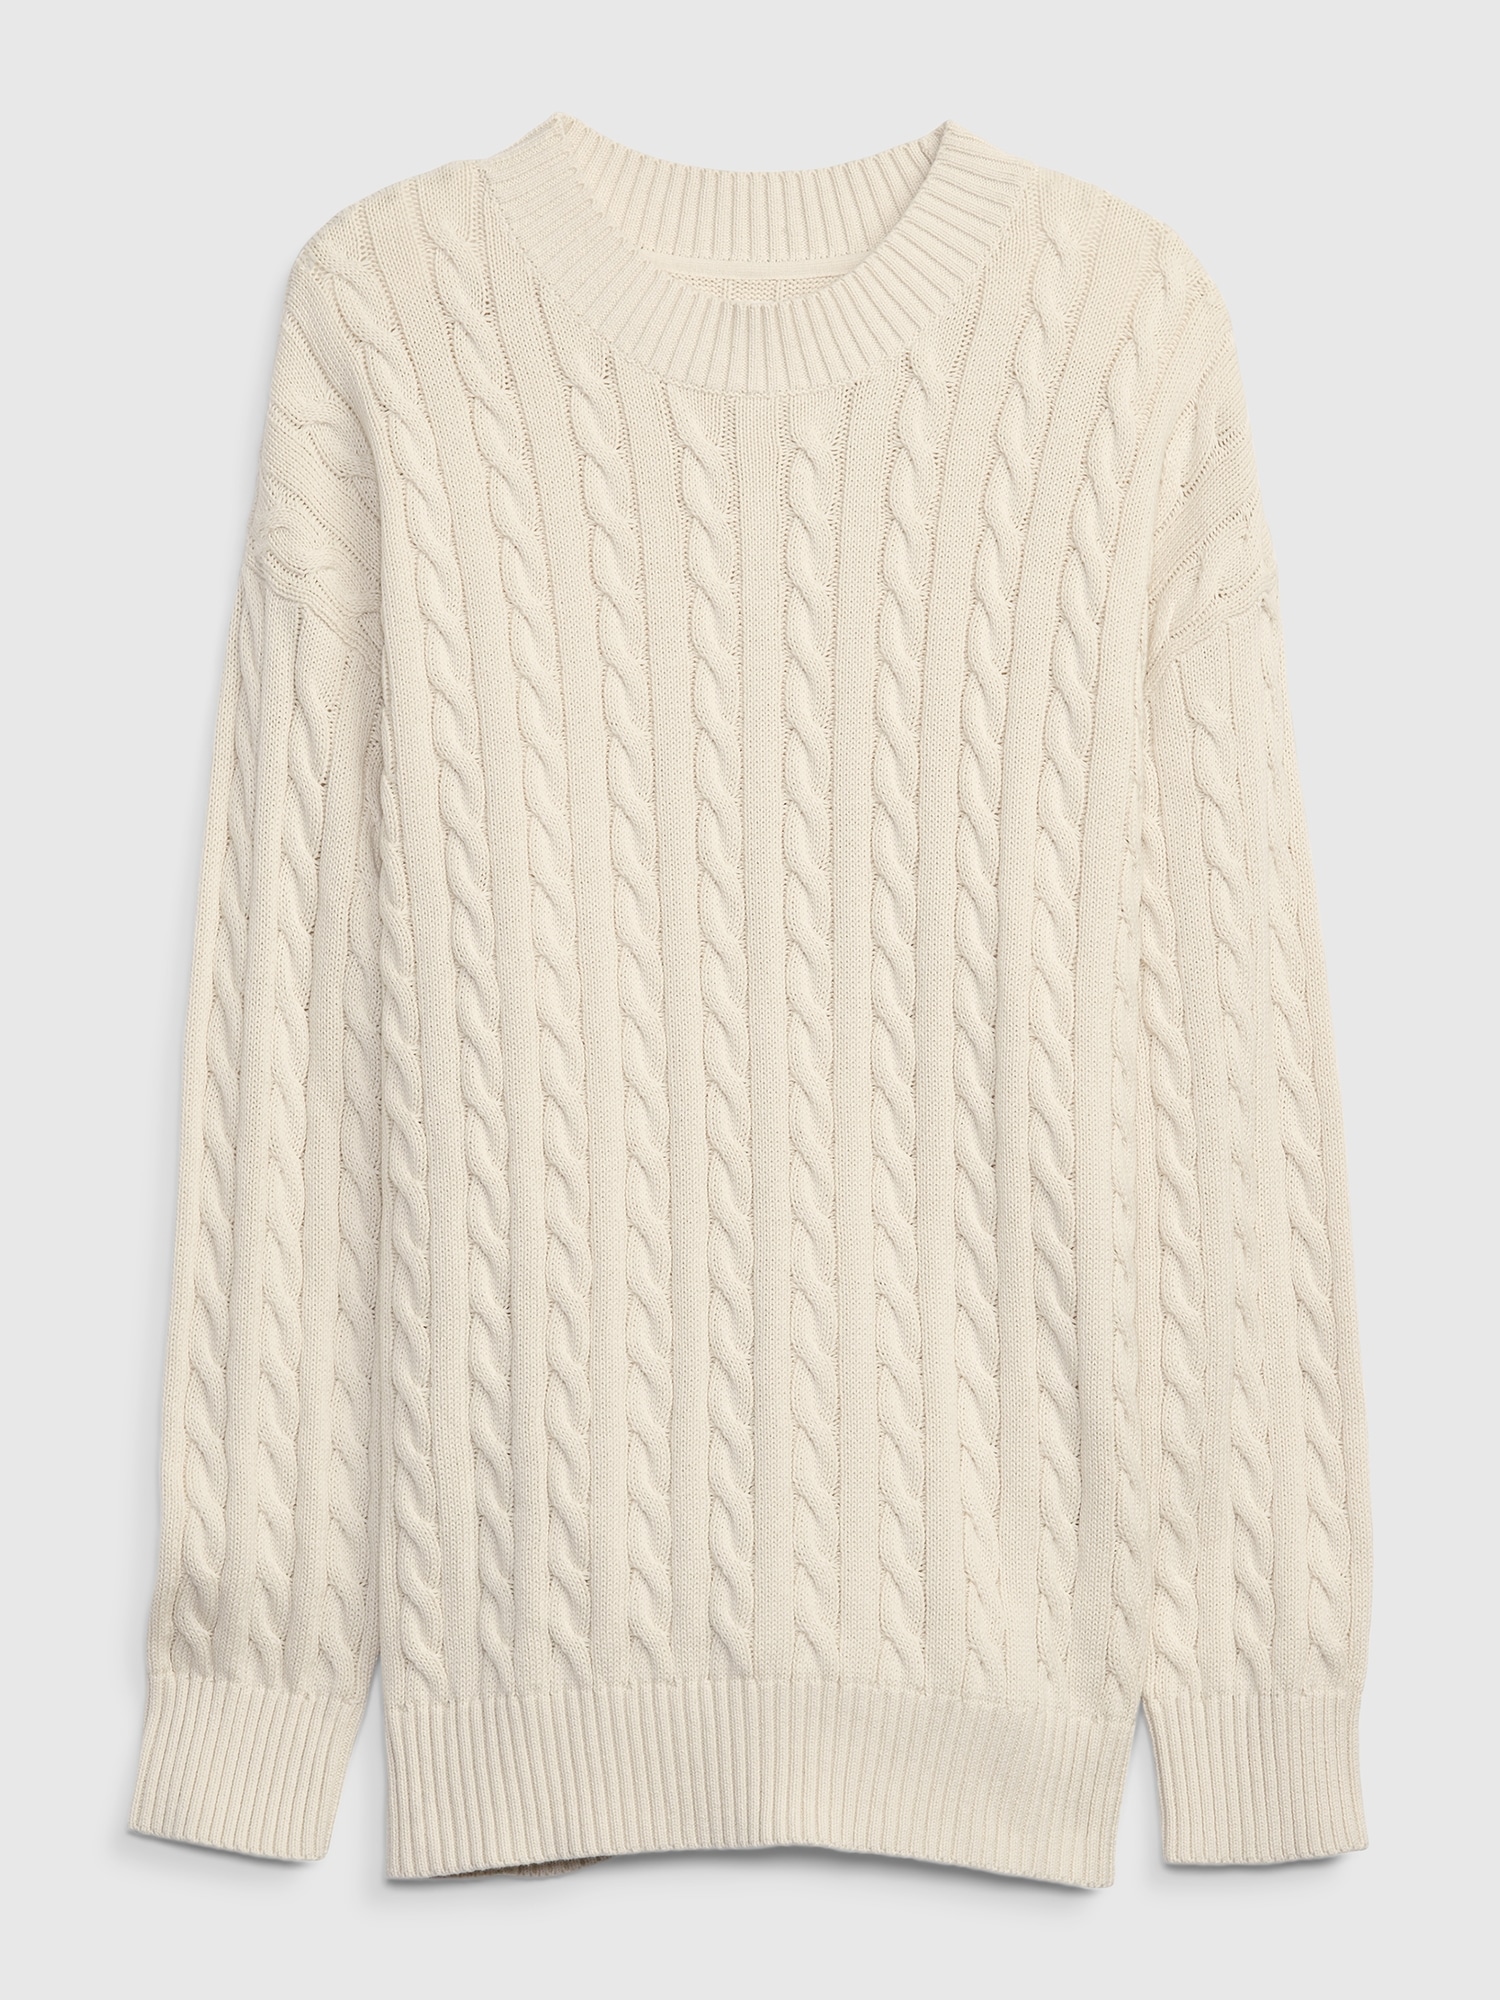 Teen 100% Organic Cotton Oversized Cable-Knit Sweater | Gap